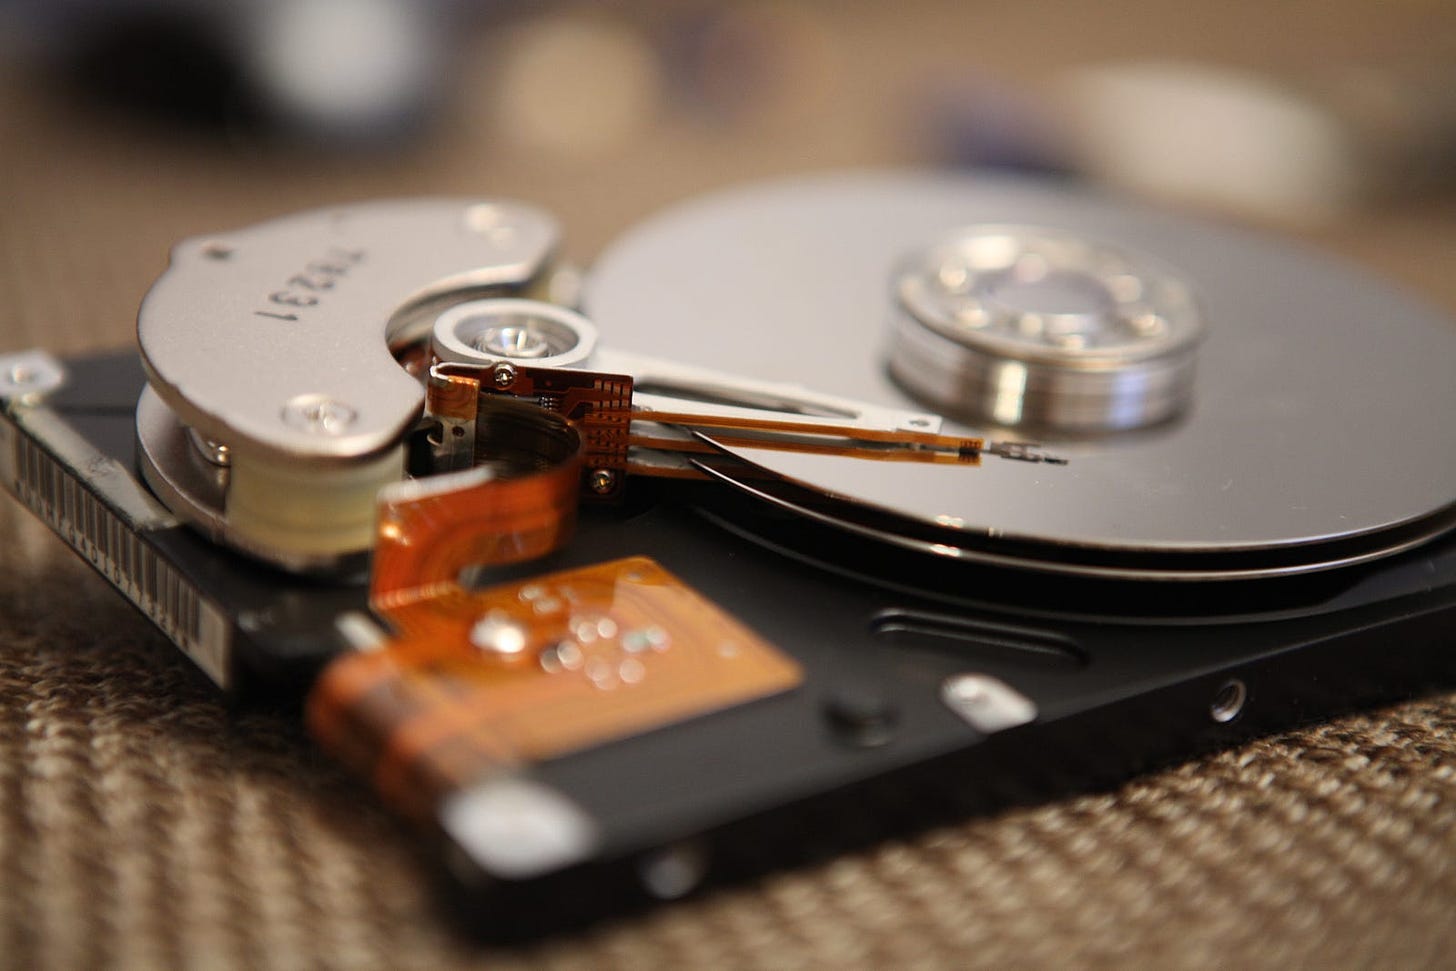 The internal workings of a hard drive with the foreground and background out of focus